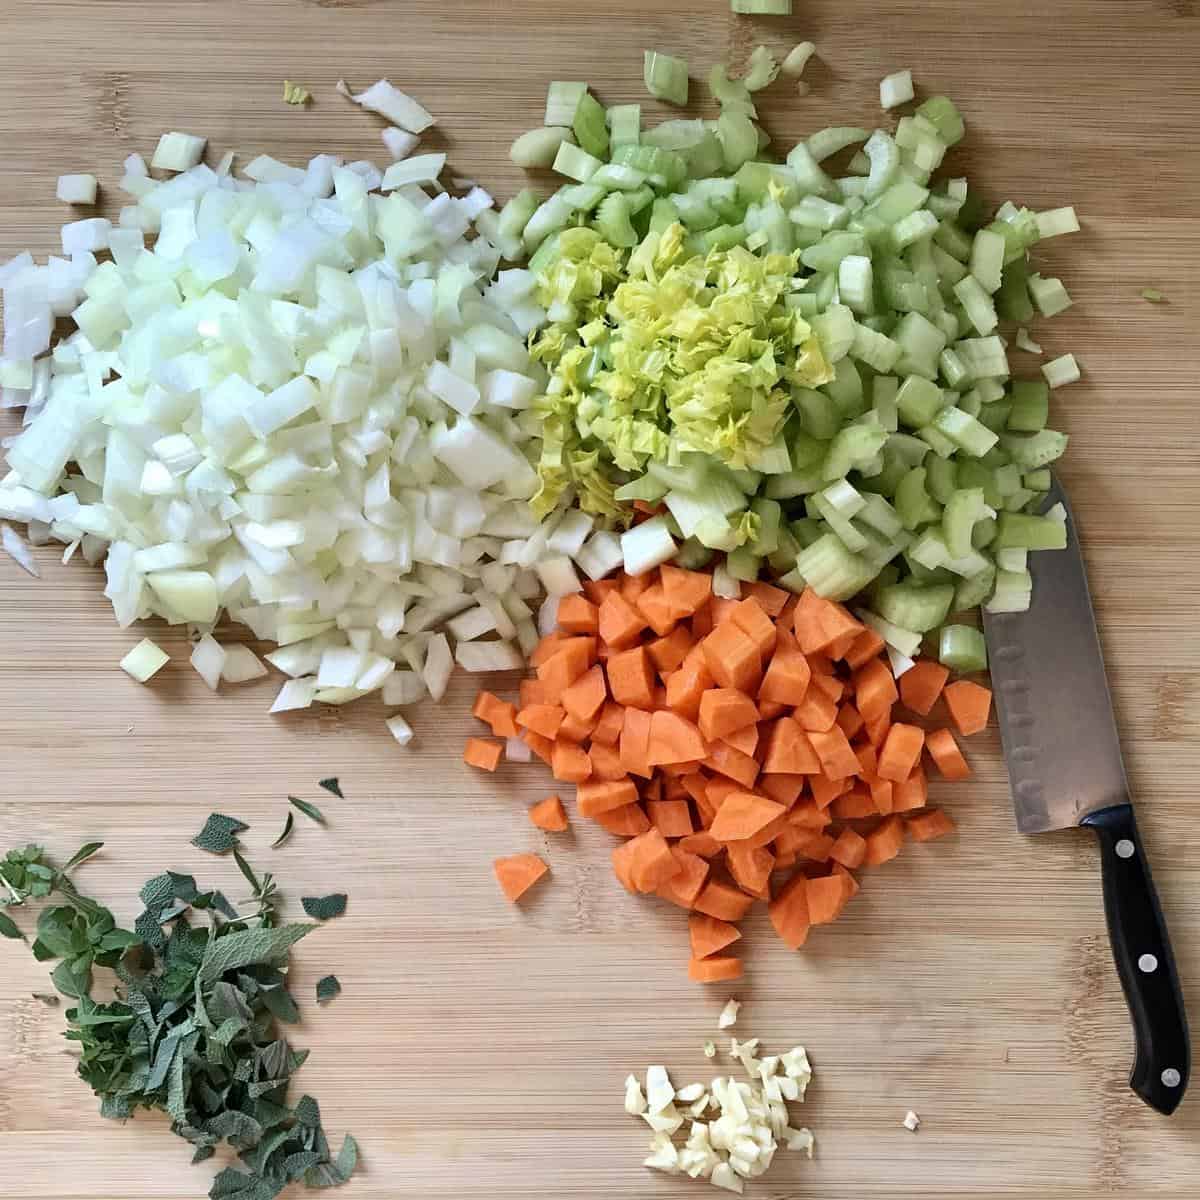 Chopped vegetables and herbs on a wooden board.